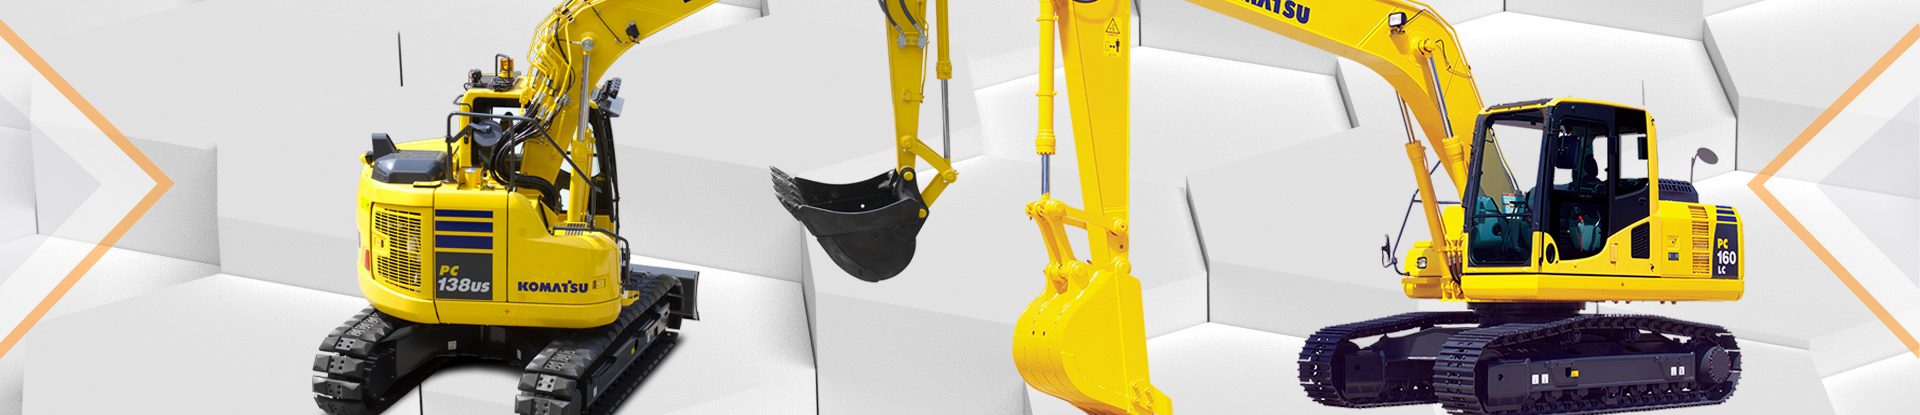 Zero tail-swing, reduced tailswing, and conventional tailswing excavators- Advantages